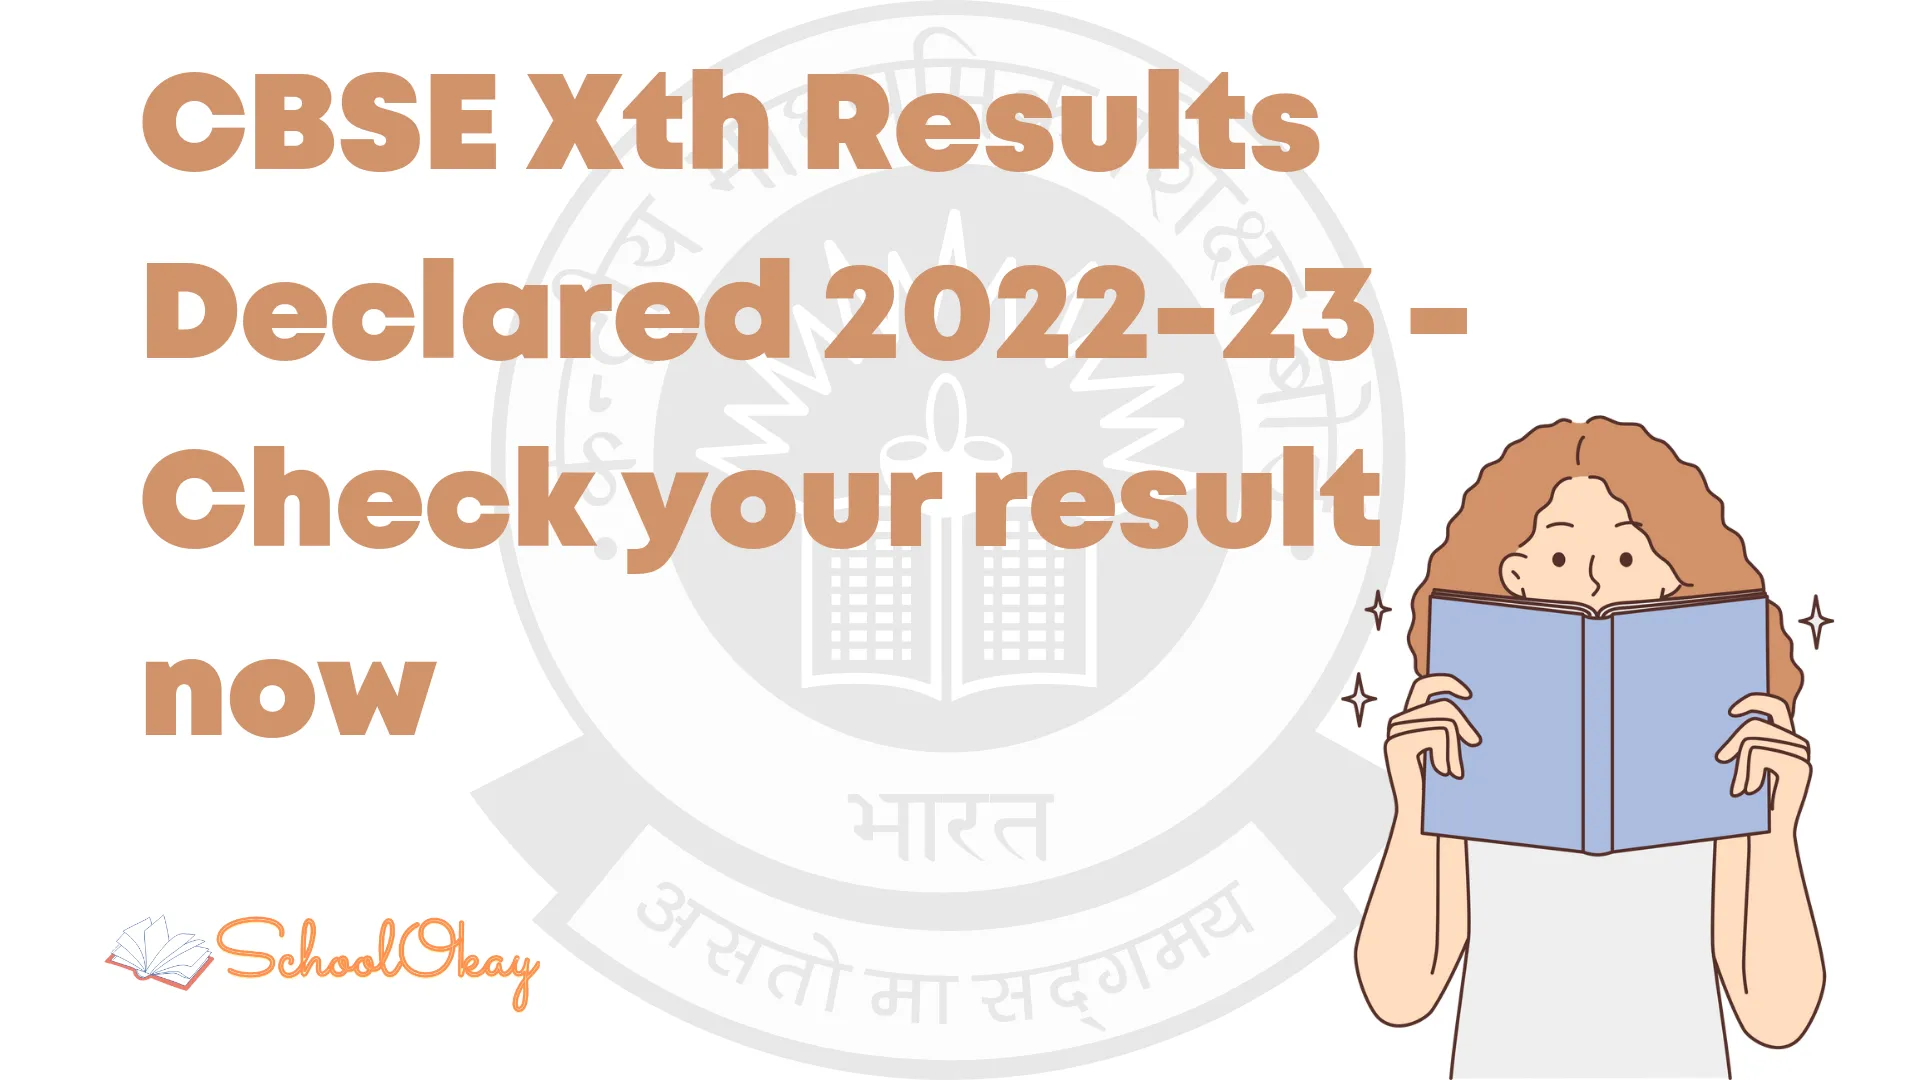 CBSE Class 10th Results Declared 2022-23 - Check your result now